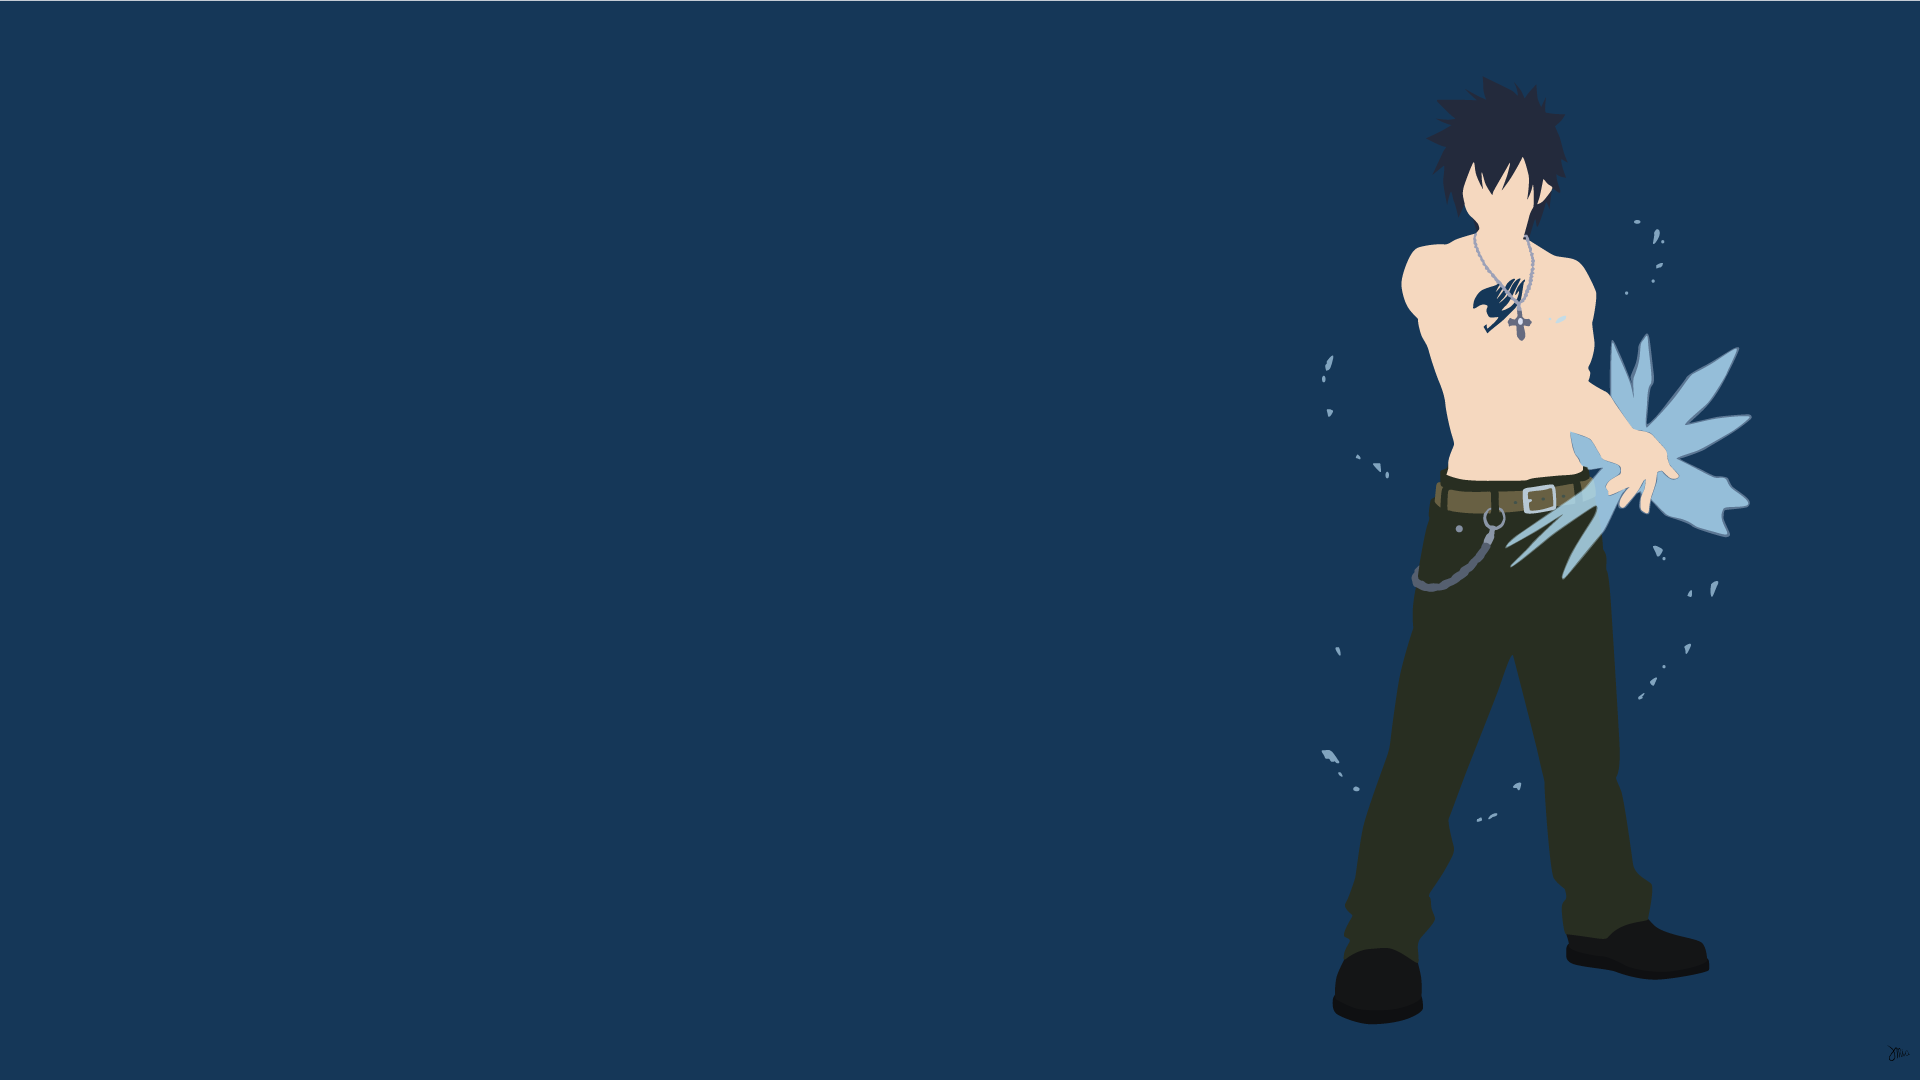 Gray Fullbuster Fairy Tail Minimalistic Wallpaper By